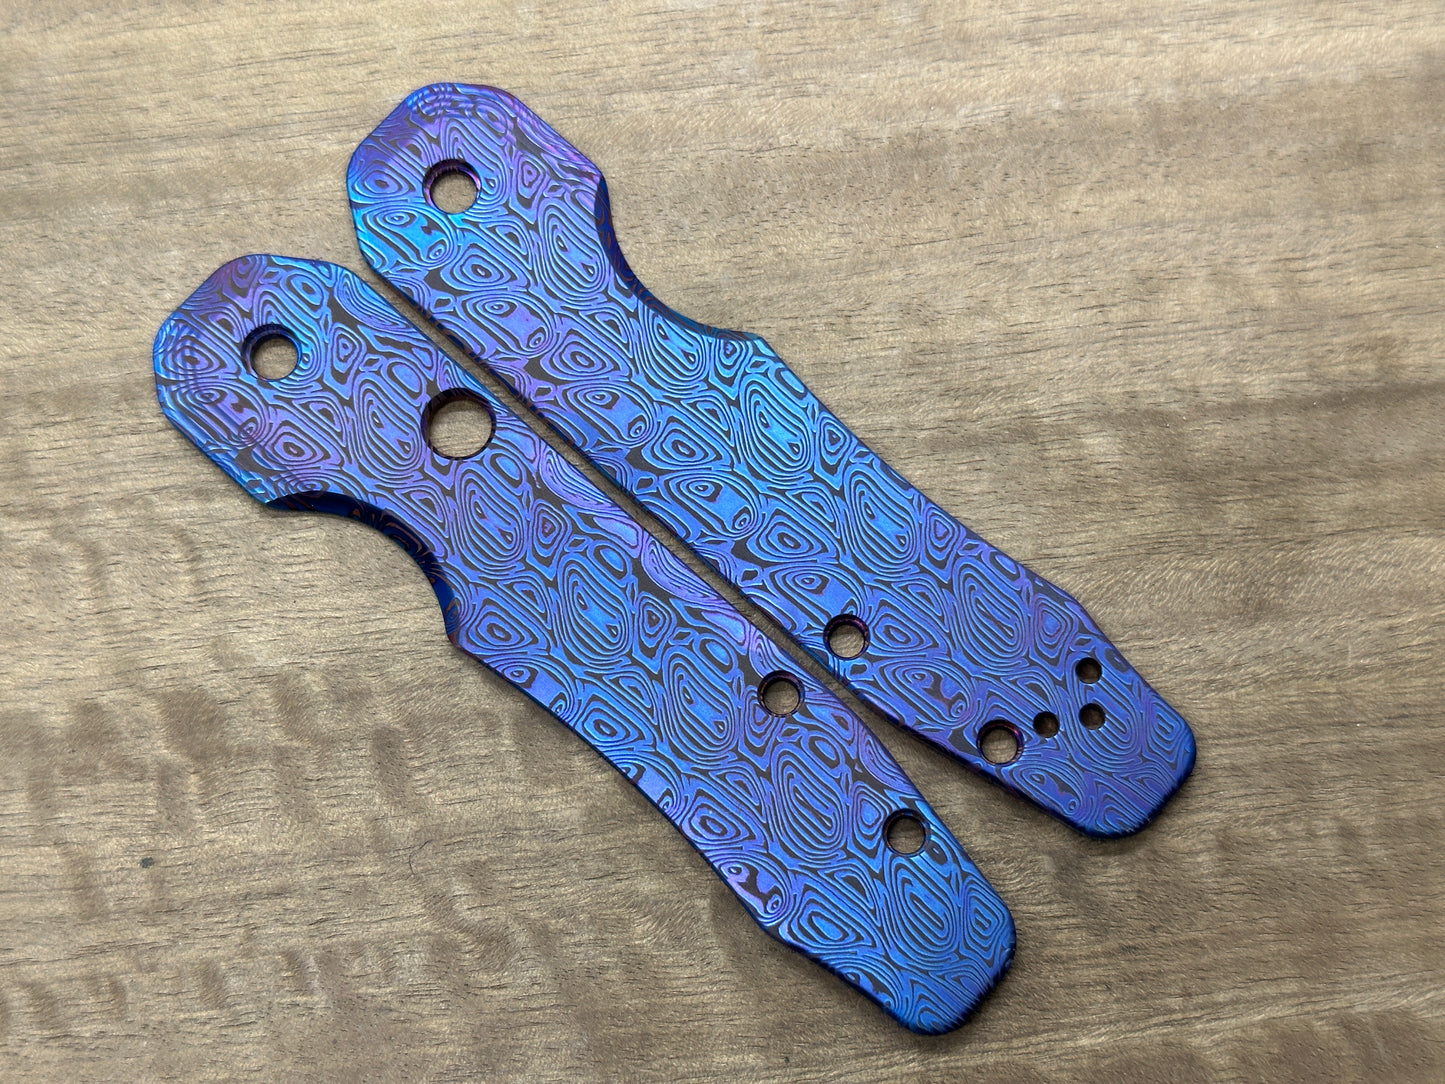 Dama AEGR Flamed Titanium Scales for Spyderco SMOCK